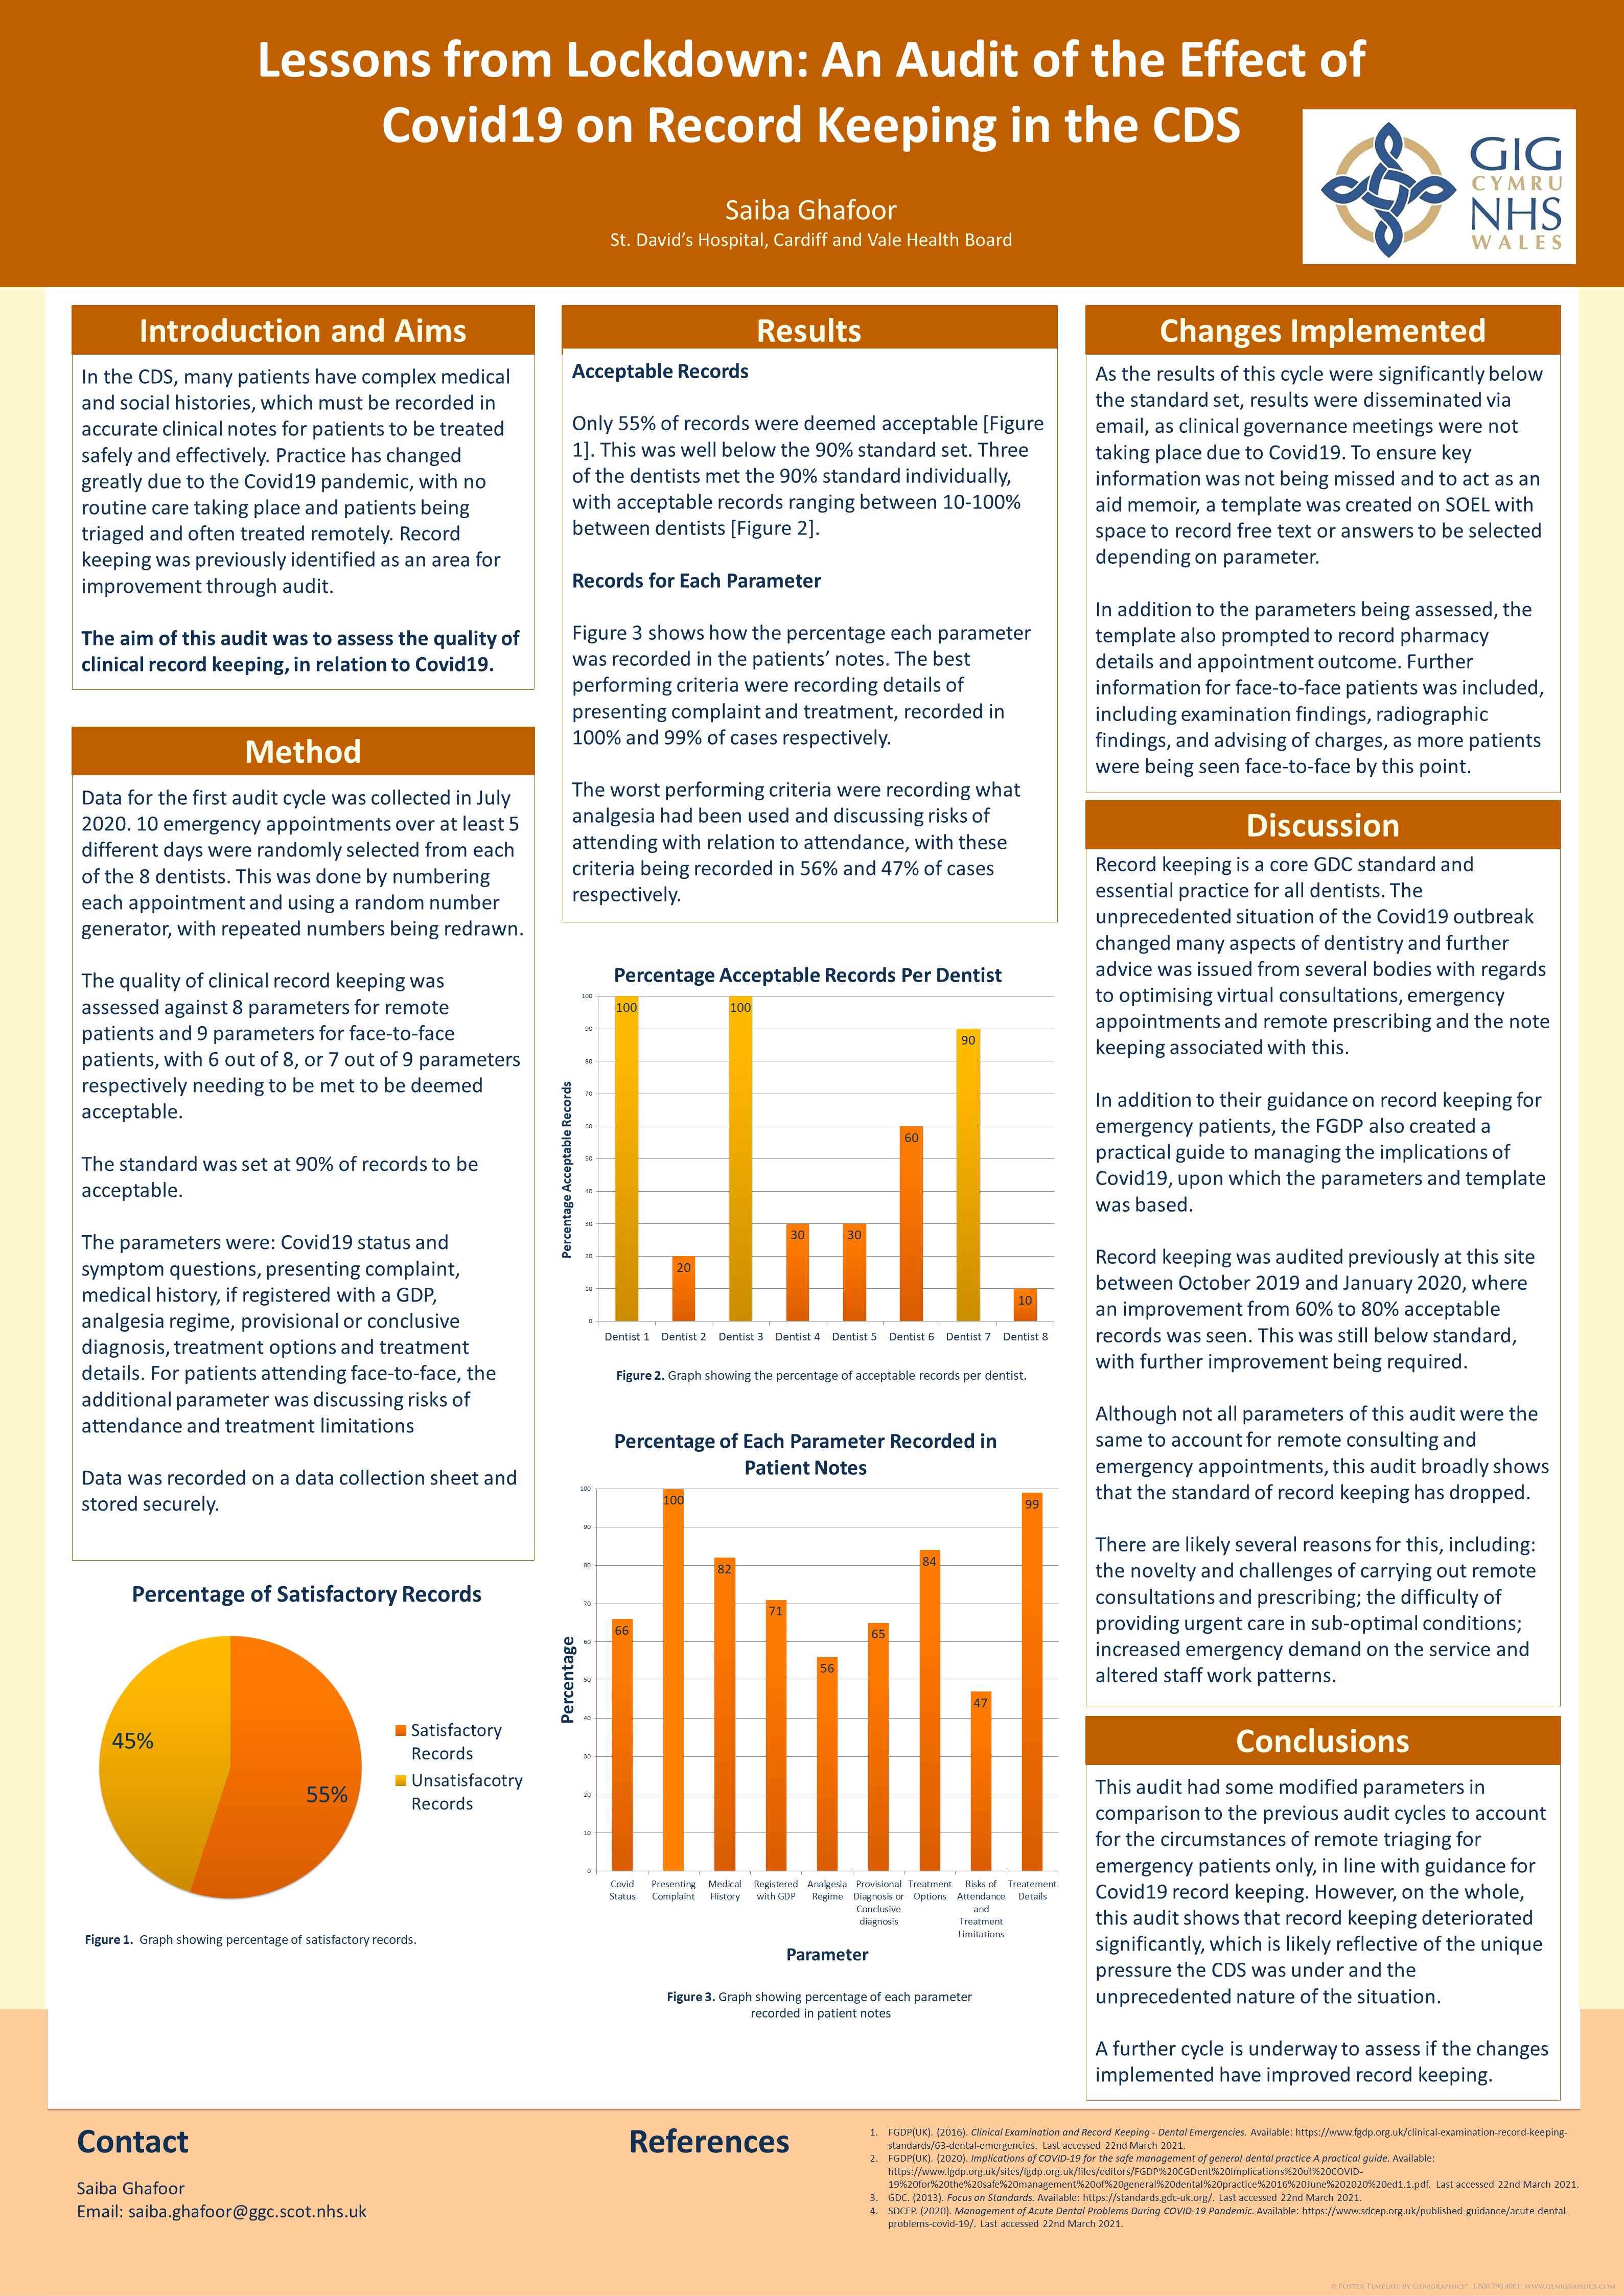 Poster Lessons from Lockdown: An Audit of the Effect of Covid19 on Record Keeping in the CDS